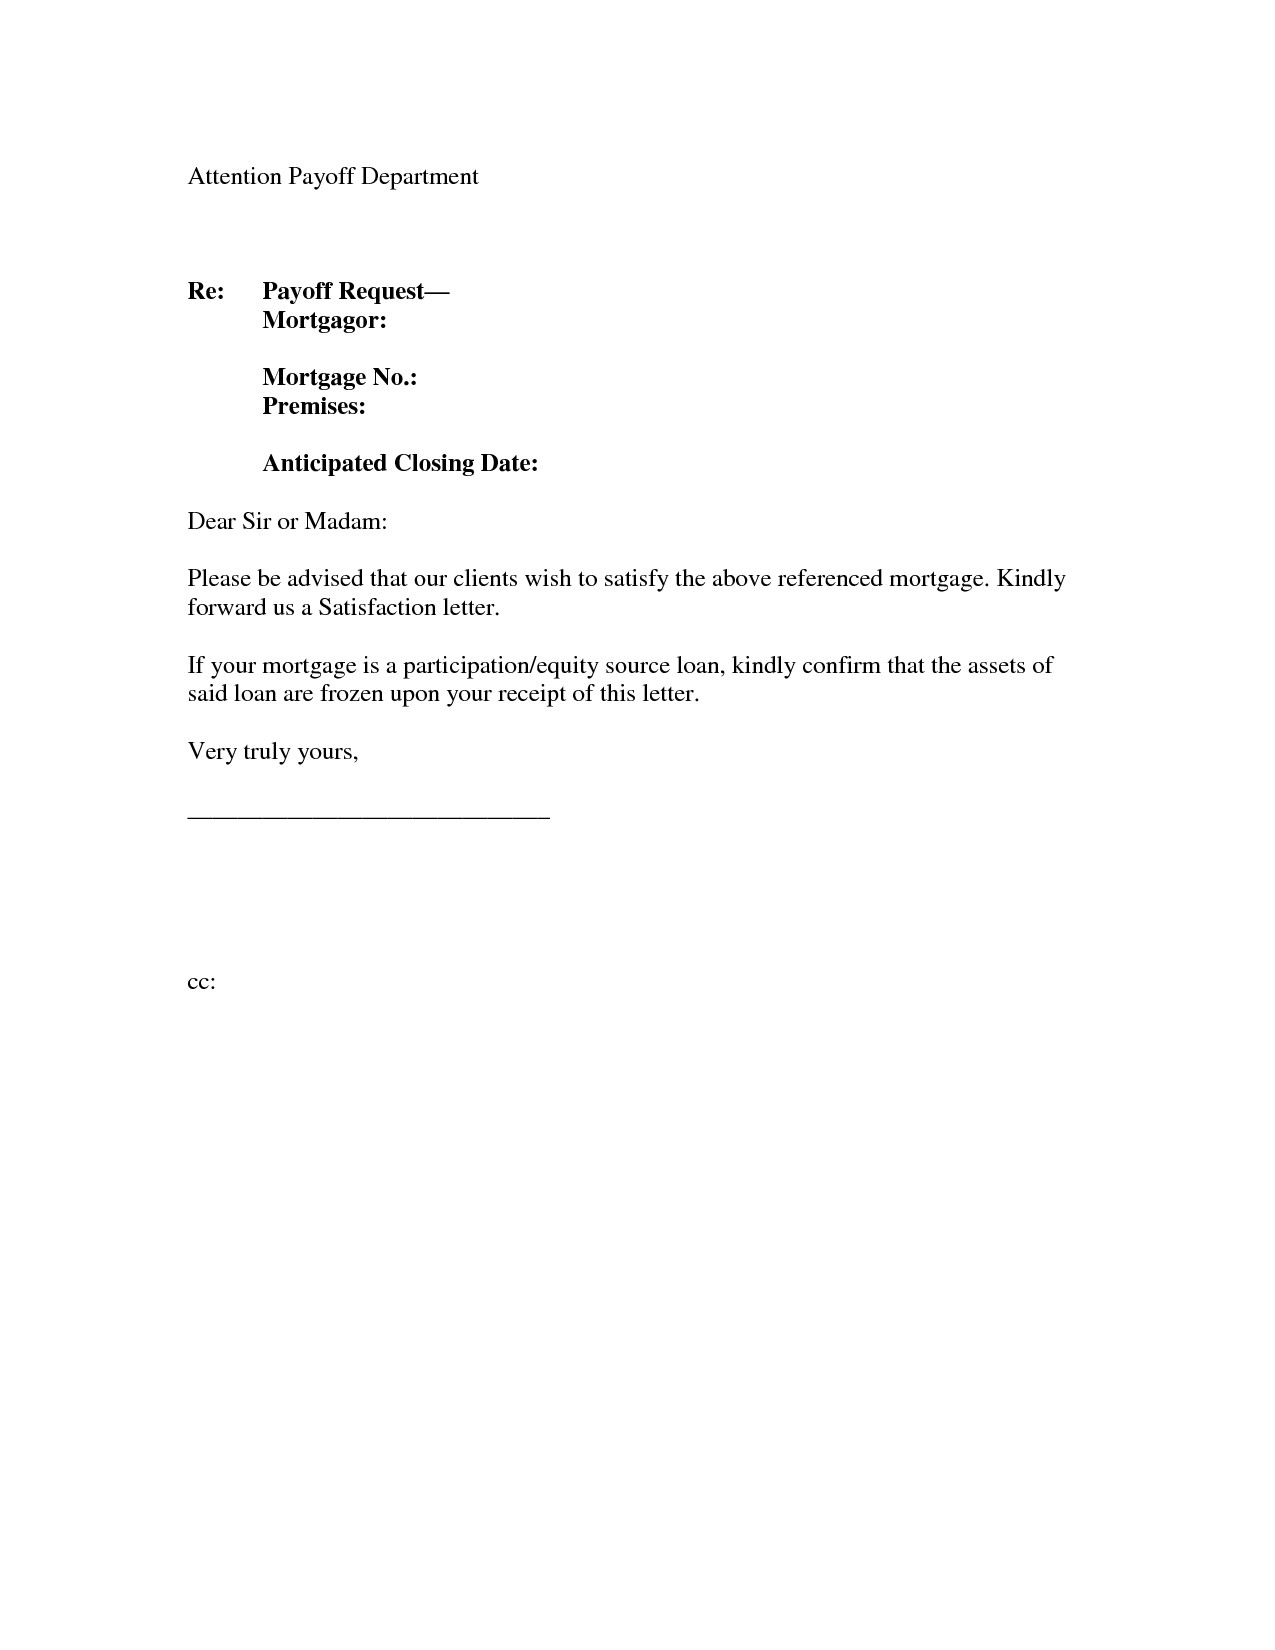 Proof Of Employment and Salary Letter Template Examples ...